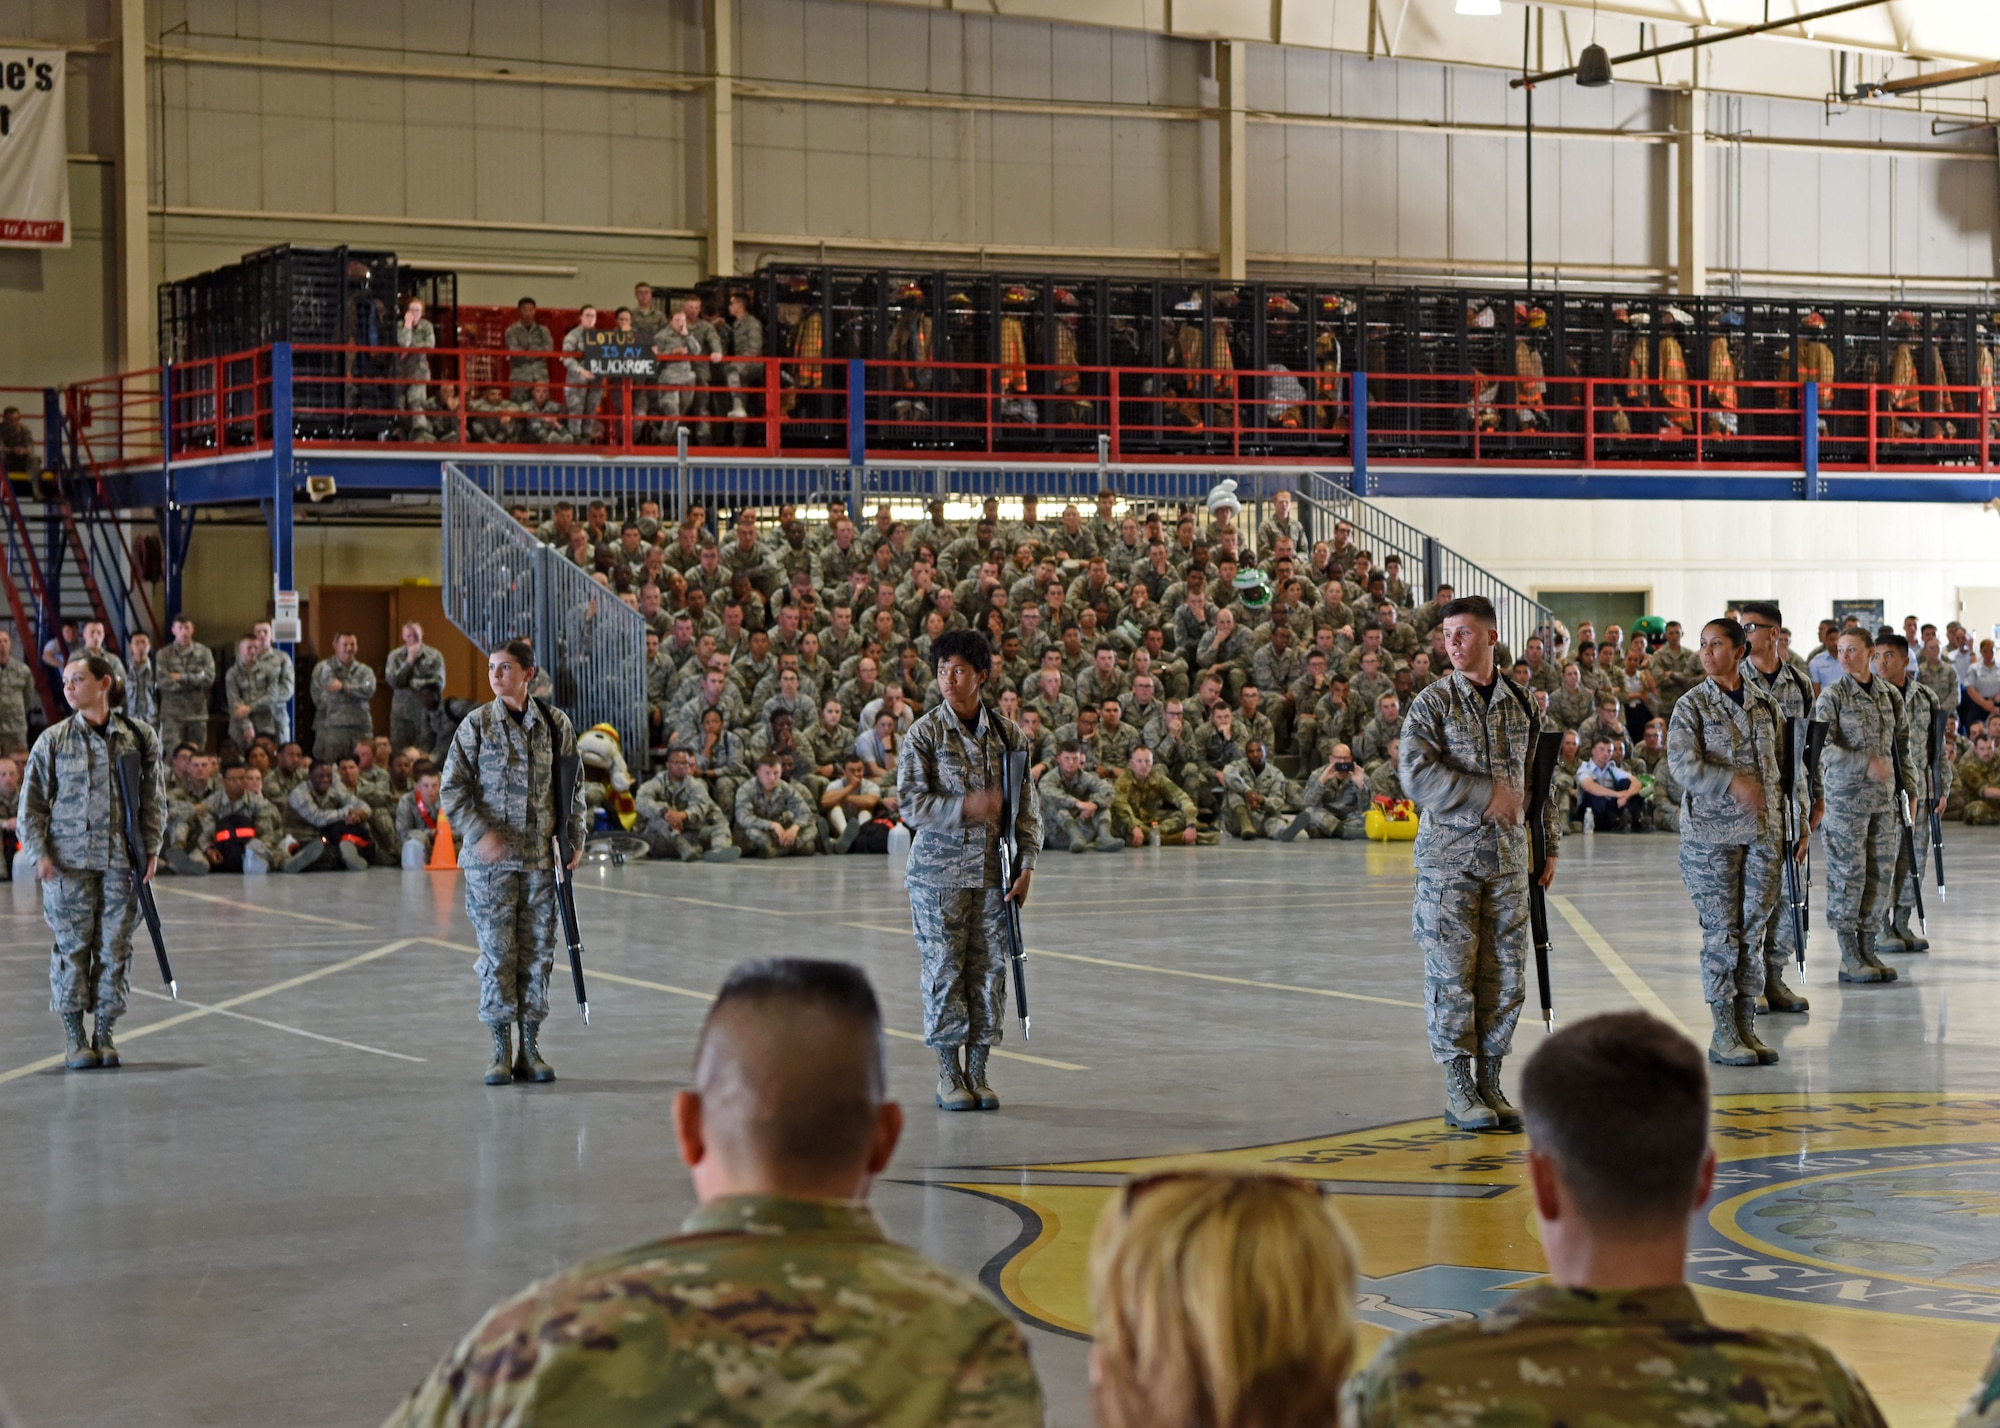 The 315th Training Squadron shows off their rifle routine by doing synchronized flourishes during the drill competition at the Louis F. Garland Department of Defense Fire Academy on Goodfellow Air Force Base, Texas, April 19, 2019. The rifle routine is just one segment in which the three squadrons competed. (U.S. Air Force photo by Airman 1st Class Ethan Sherwood/Released)